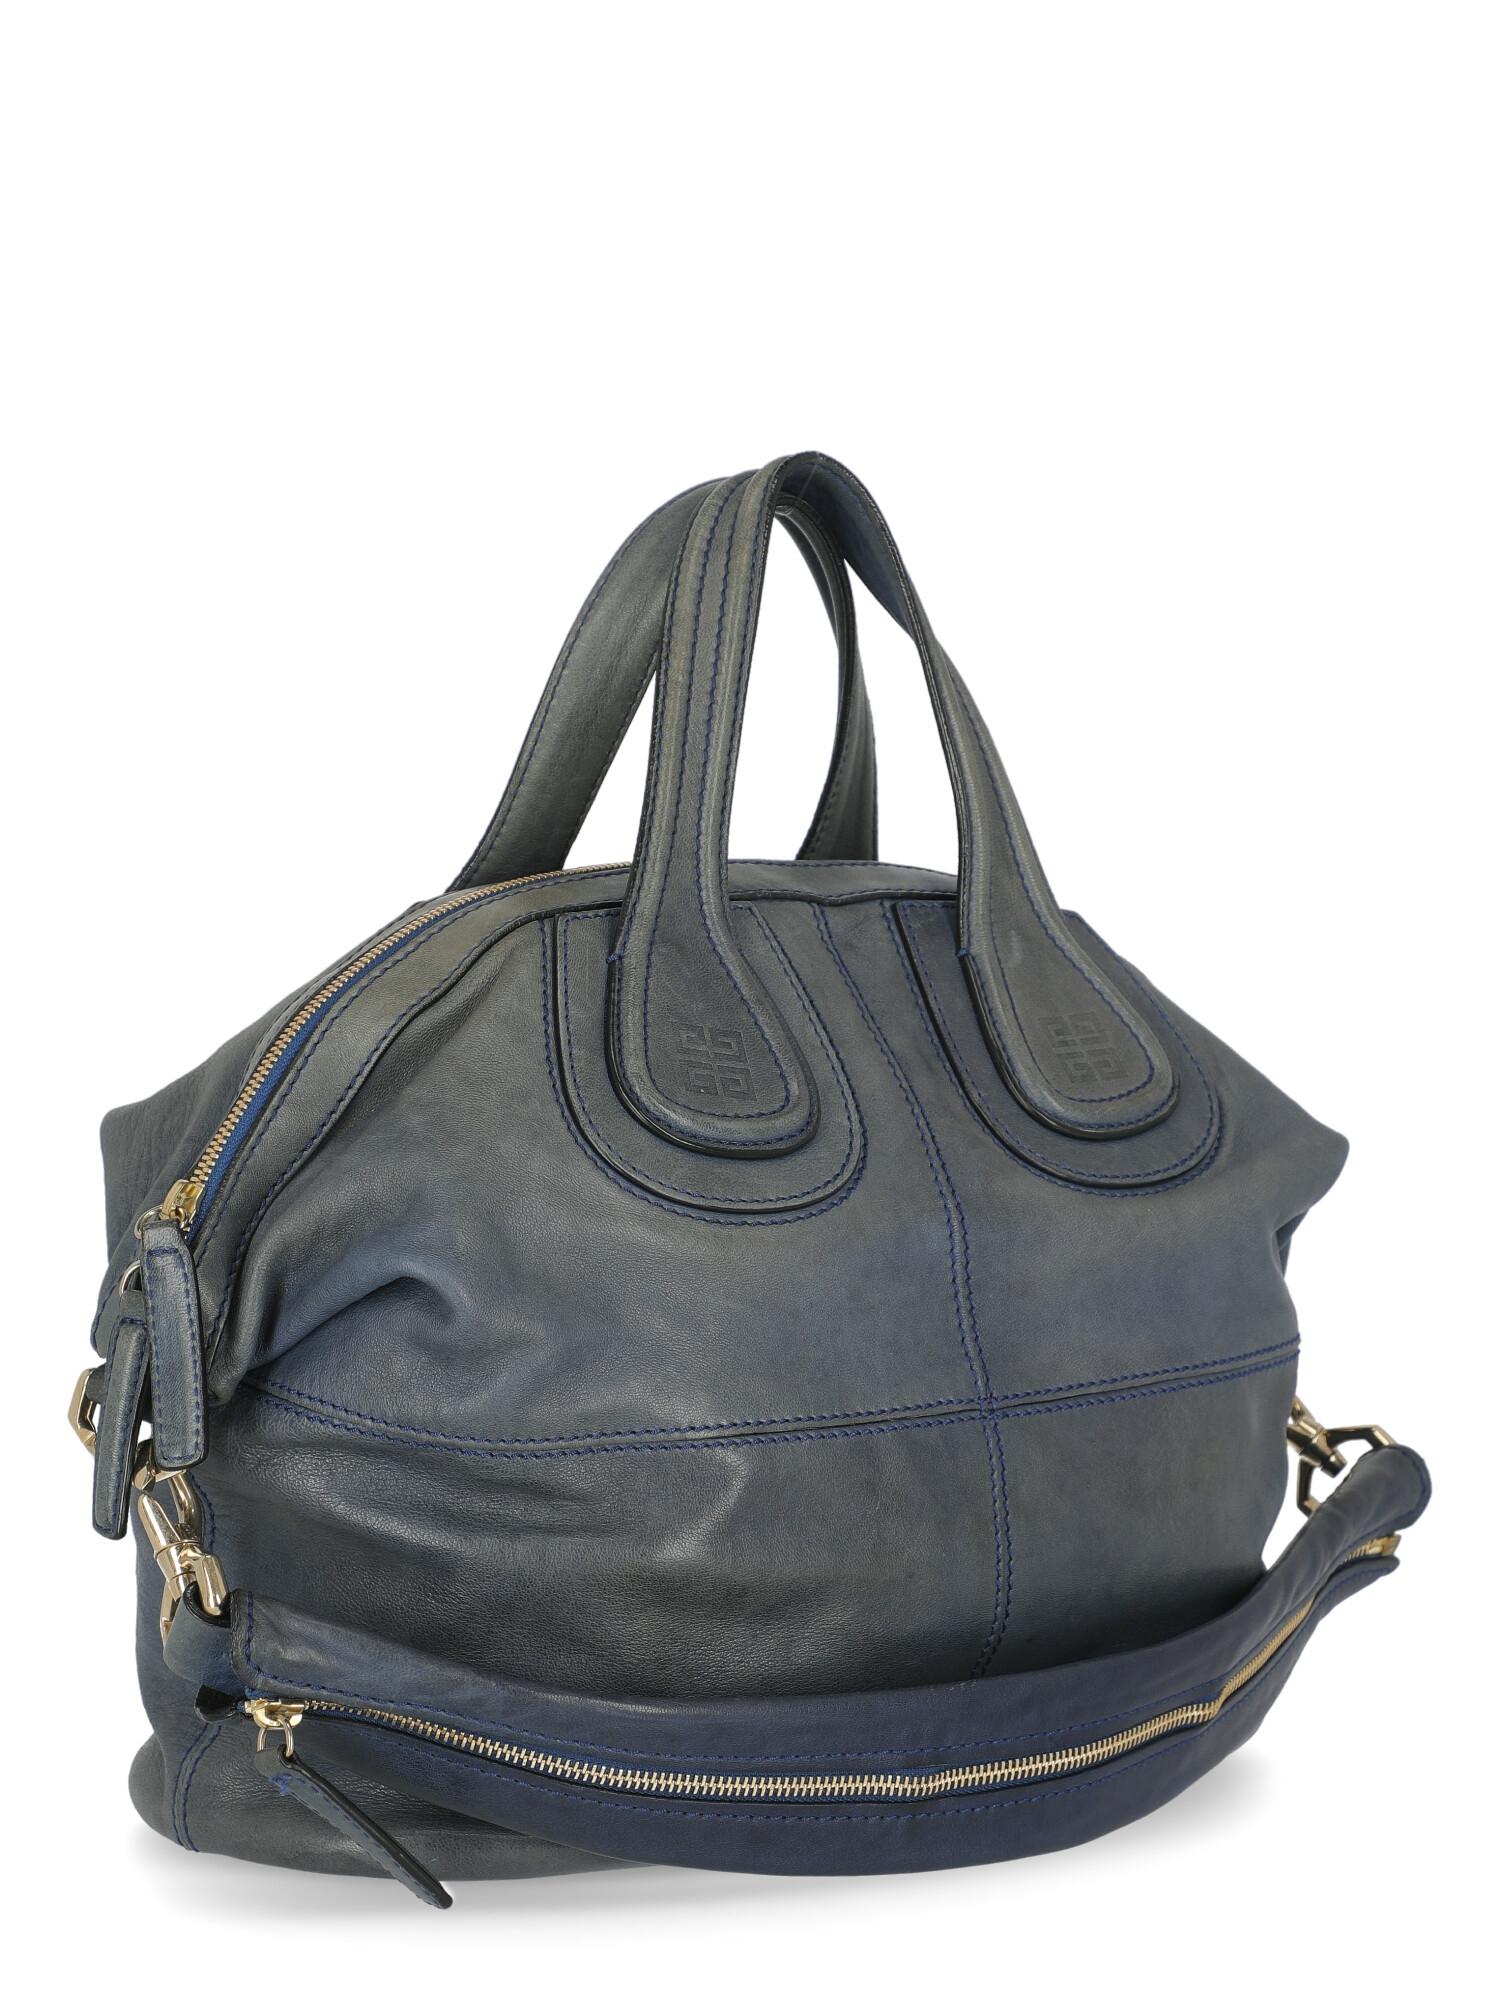 Gray Givenchy Woman Shoulder bag Nightingale Navy Leather